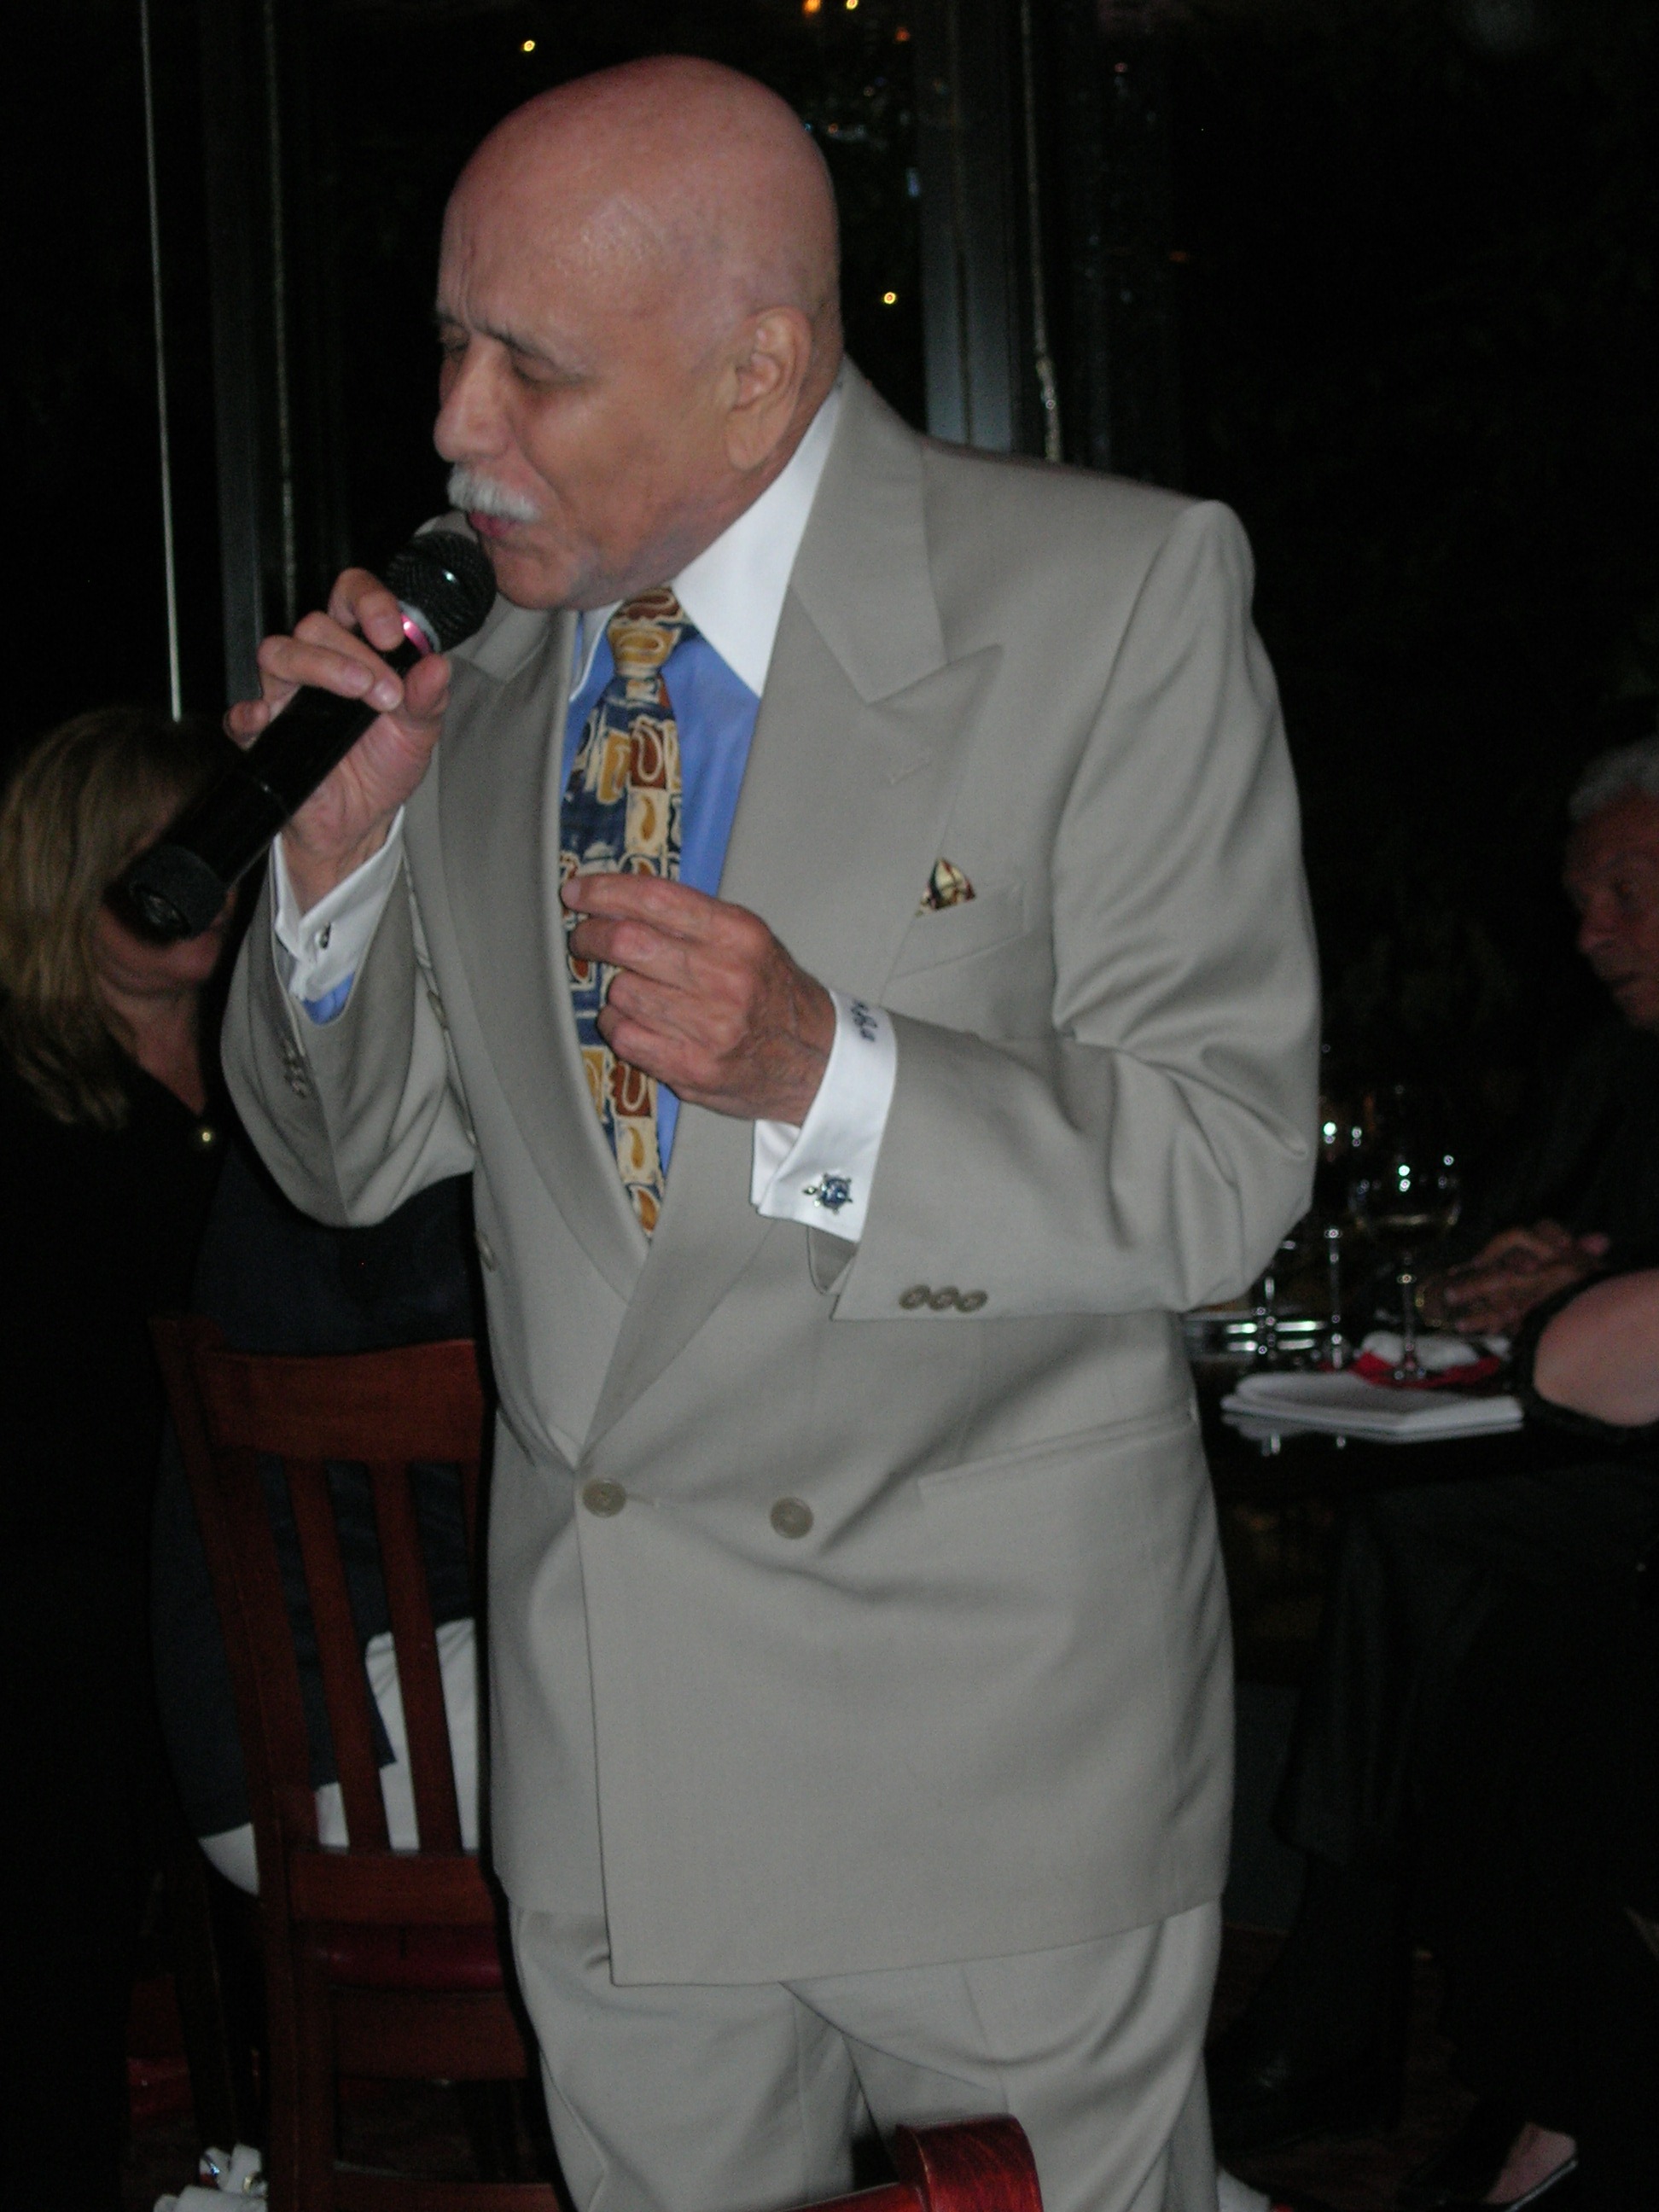 Singing at Club A Steakhouse, with house entertainer, Danny Nye